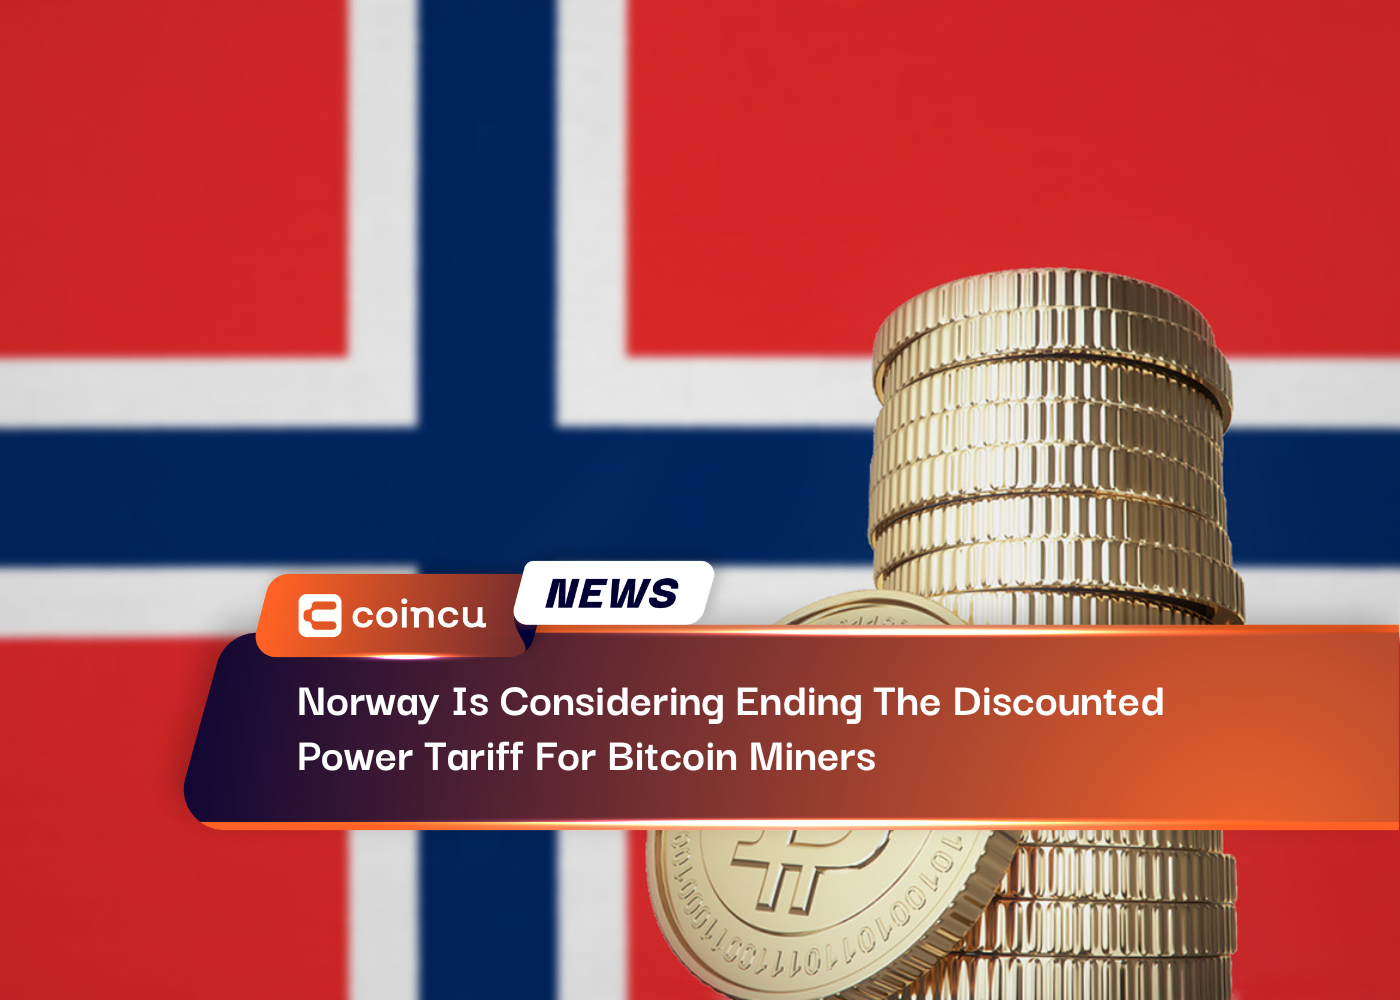 Norway Is Considering Ending The Discounted Power Tariff